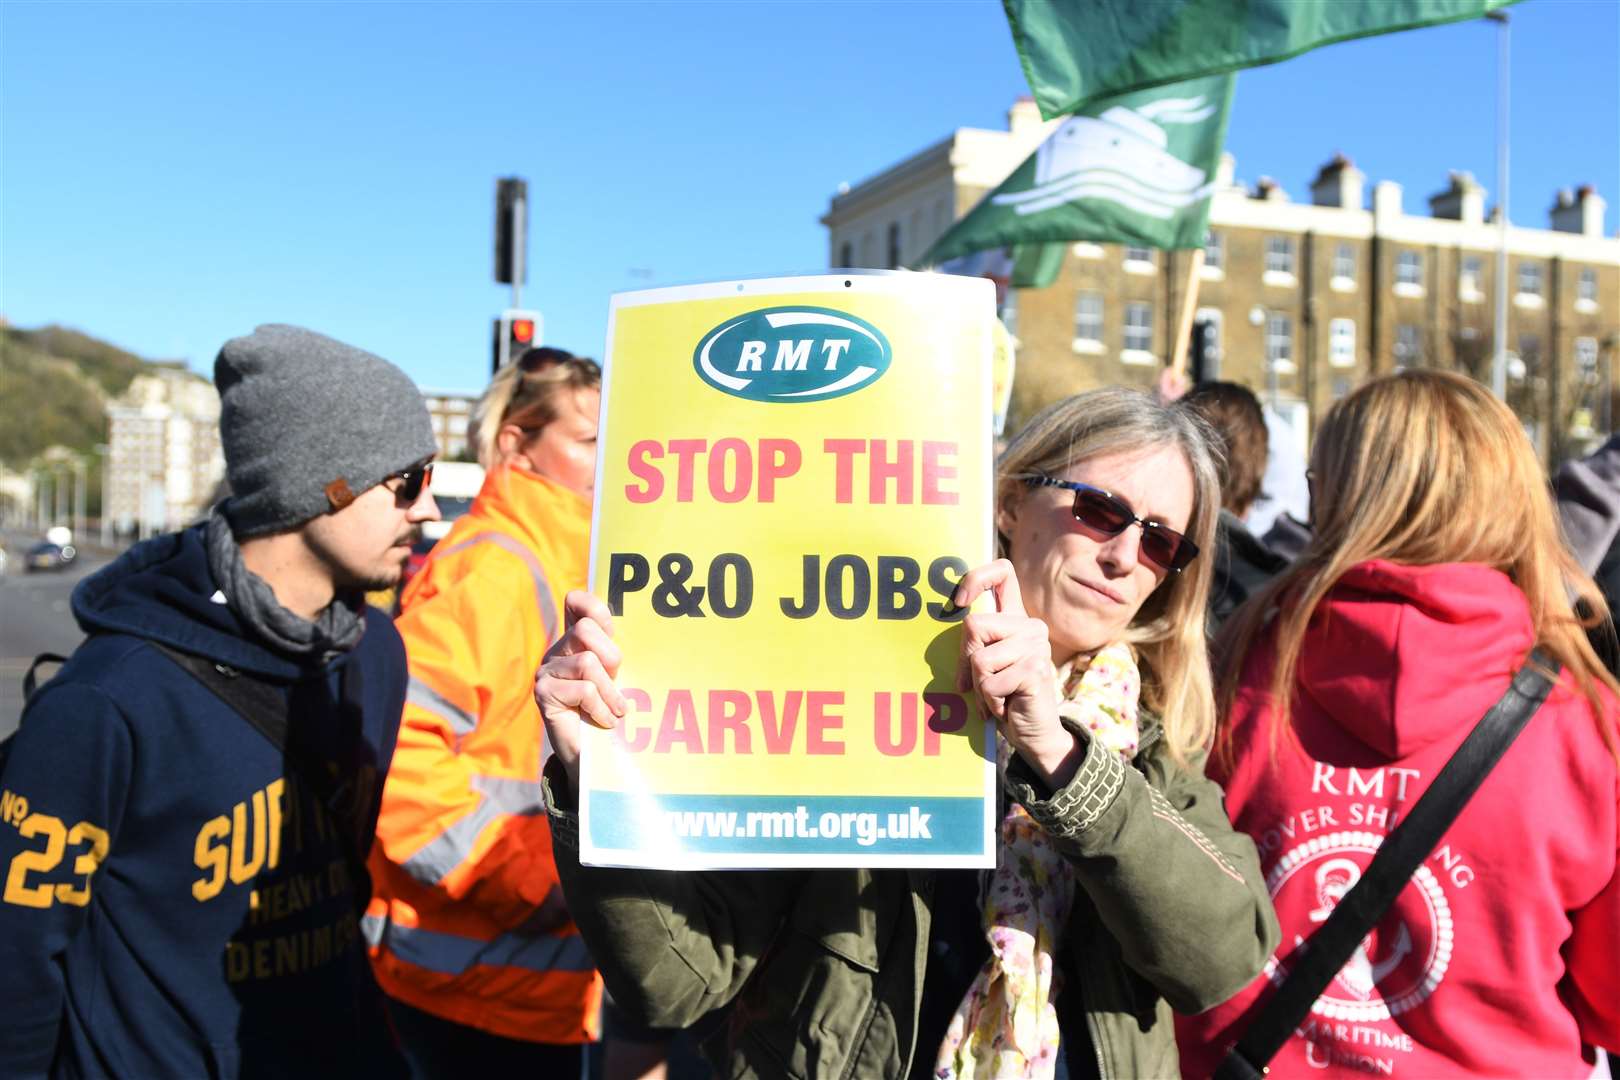 There were two days of protests in Dover as P&O faced a public backlash for their decision to sack 800 workers